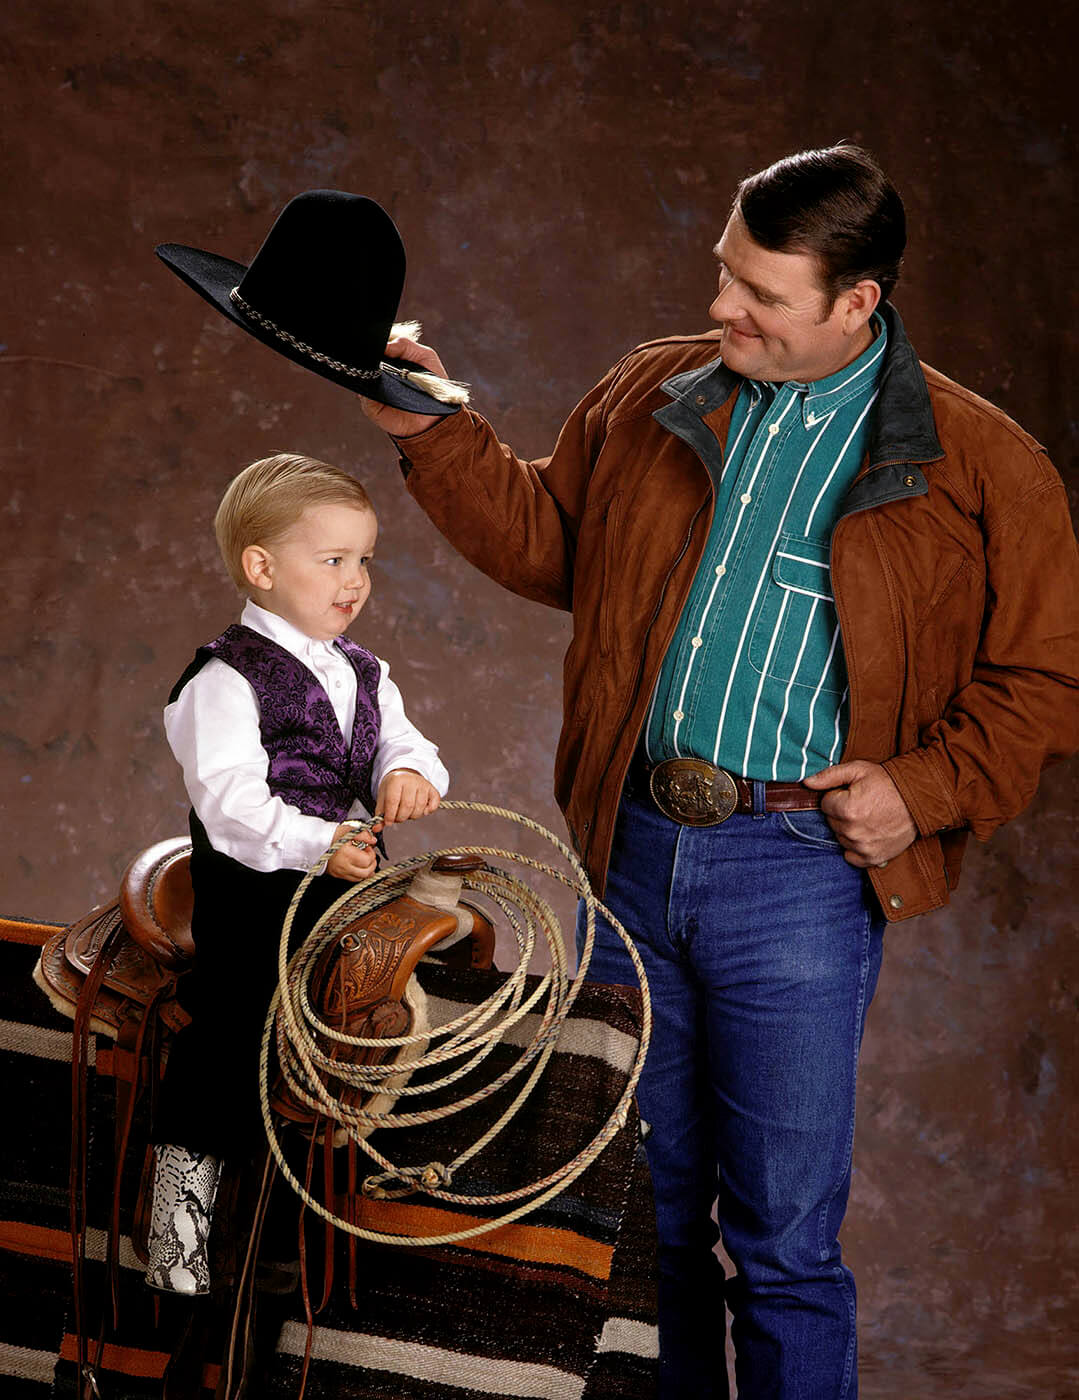 A family portrait of a father and son taken at Eagle Visions photography studio.